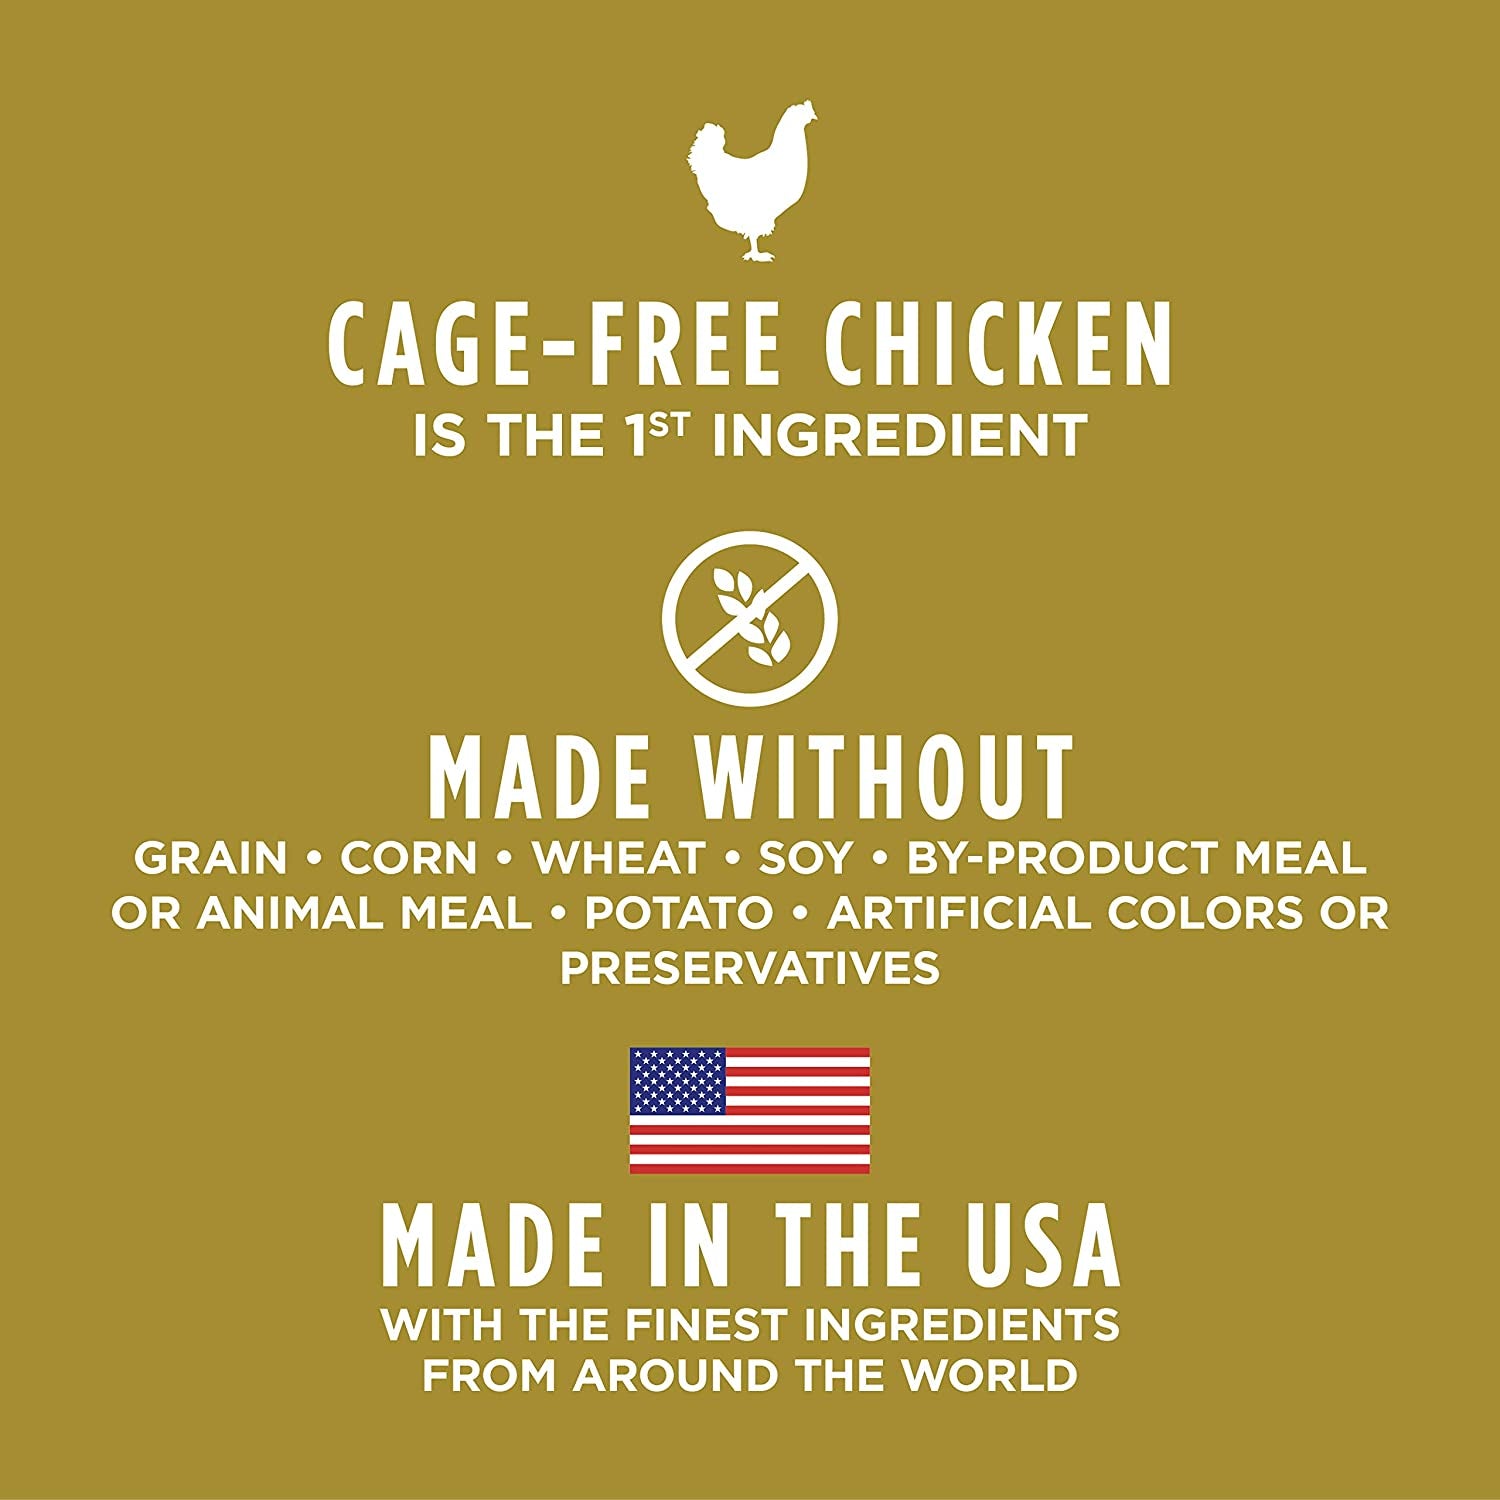 Instinct Ultimate Protein Grain Free Cage Free Chicken Recipe Natural Dry Cat Food, 10 Lb. Bag